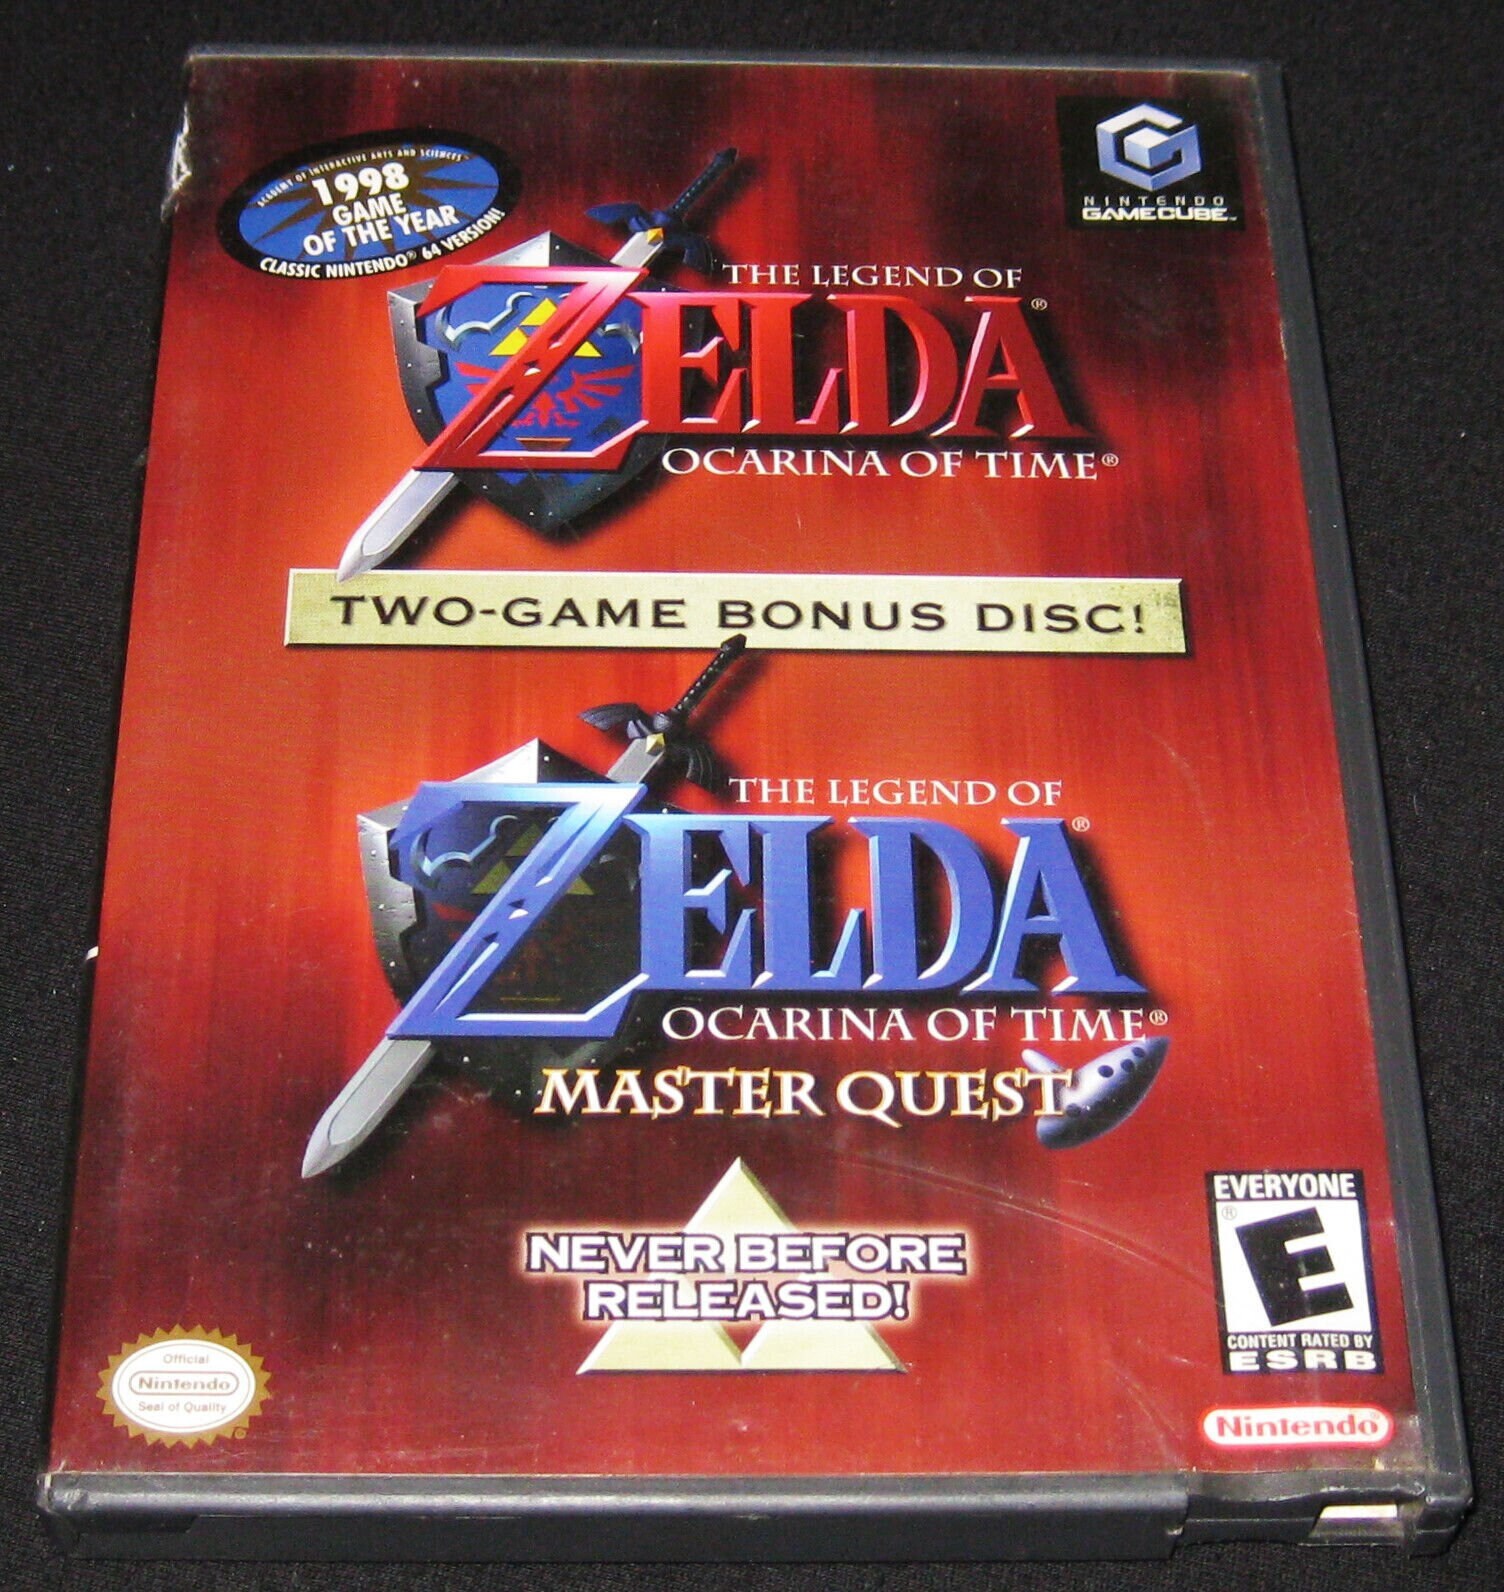 The Legend of Zelda: The Windwaker, Ocarina of time, and Ocarina of Time  Master Quest - GameCube, Game Cube